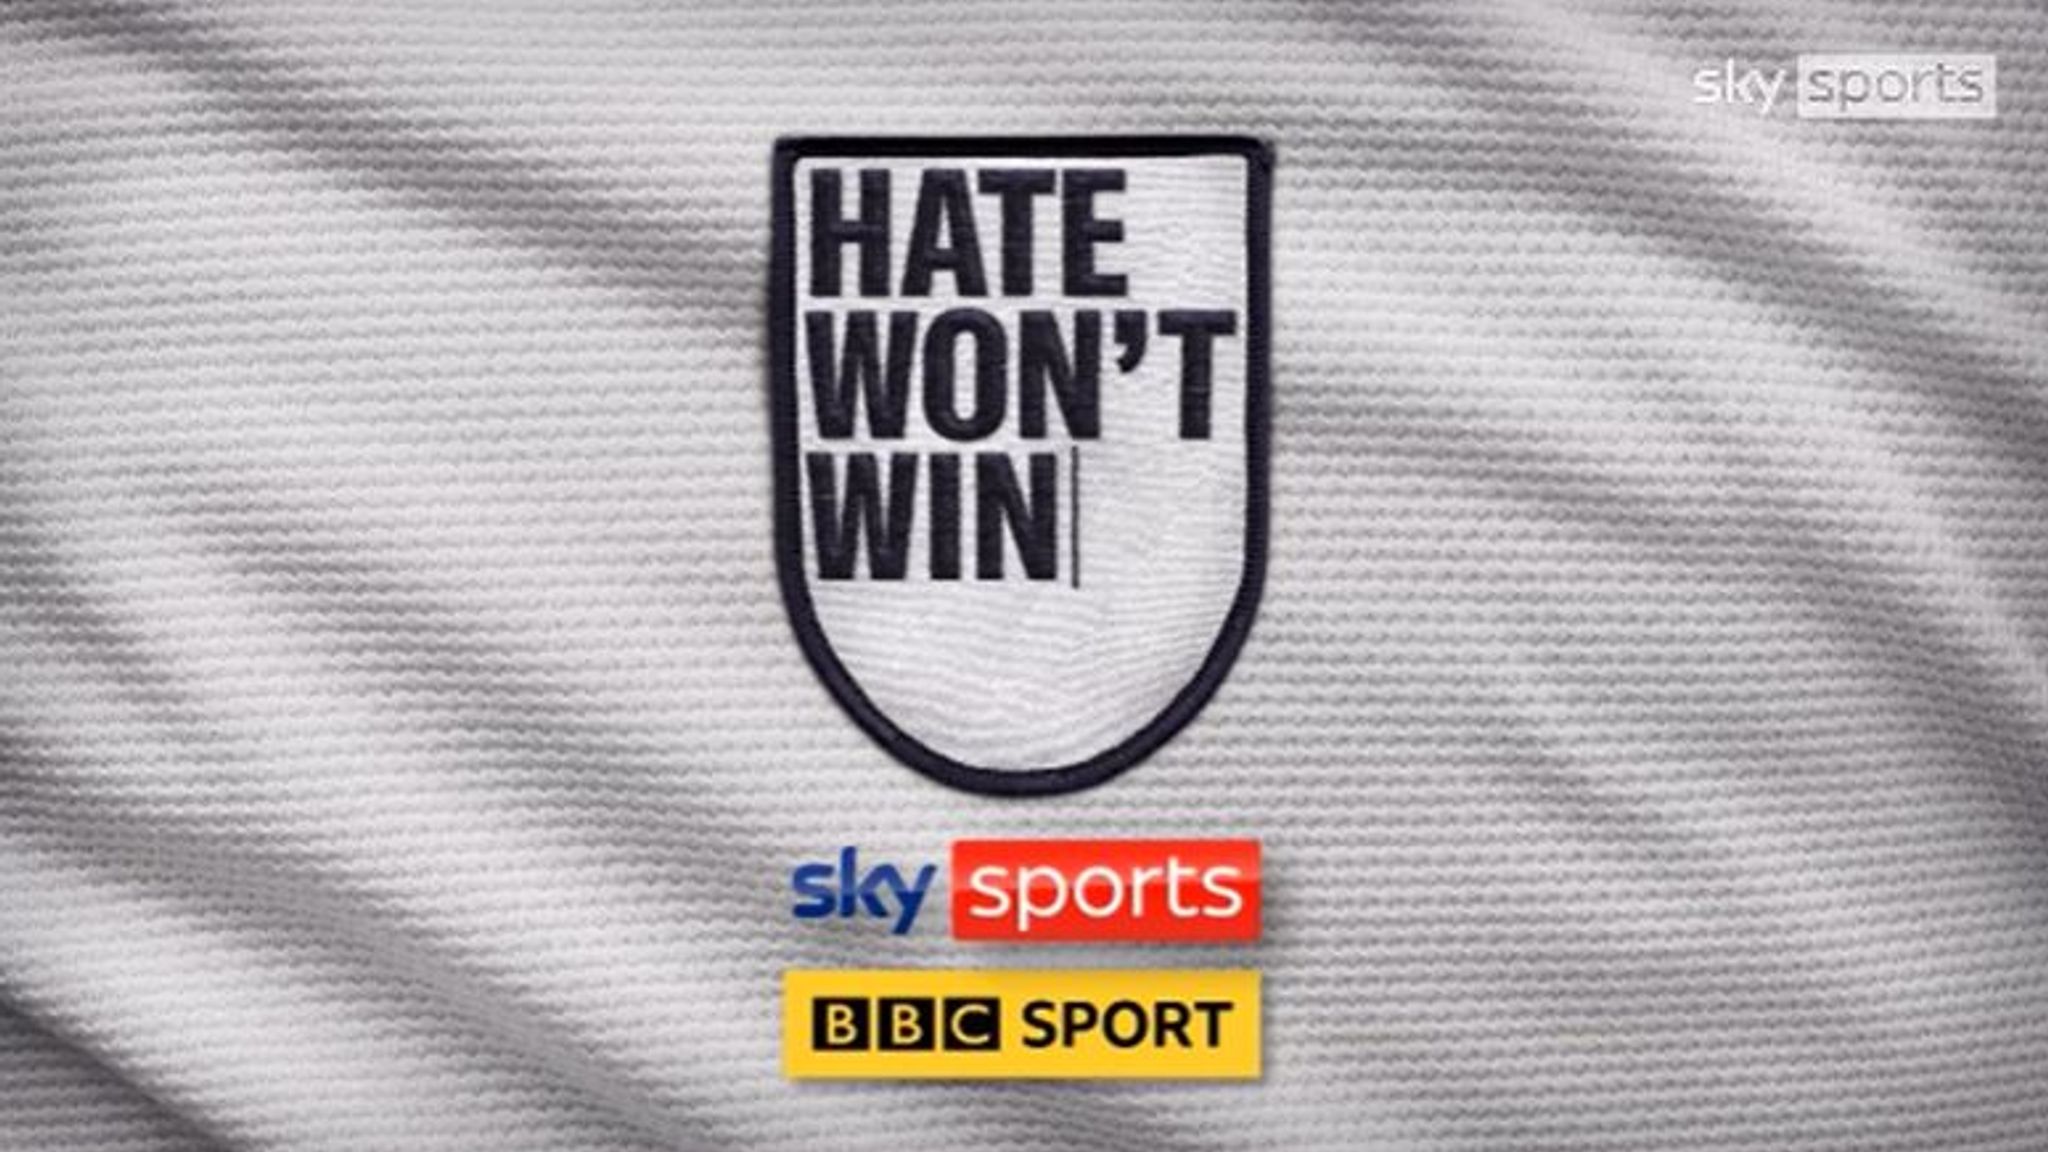 Sky Sports and BBC Sport stars unite to fight against online abuse in Hate Wont Win video UK News Sky News